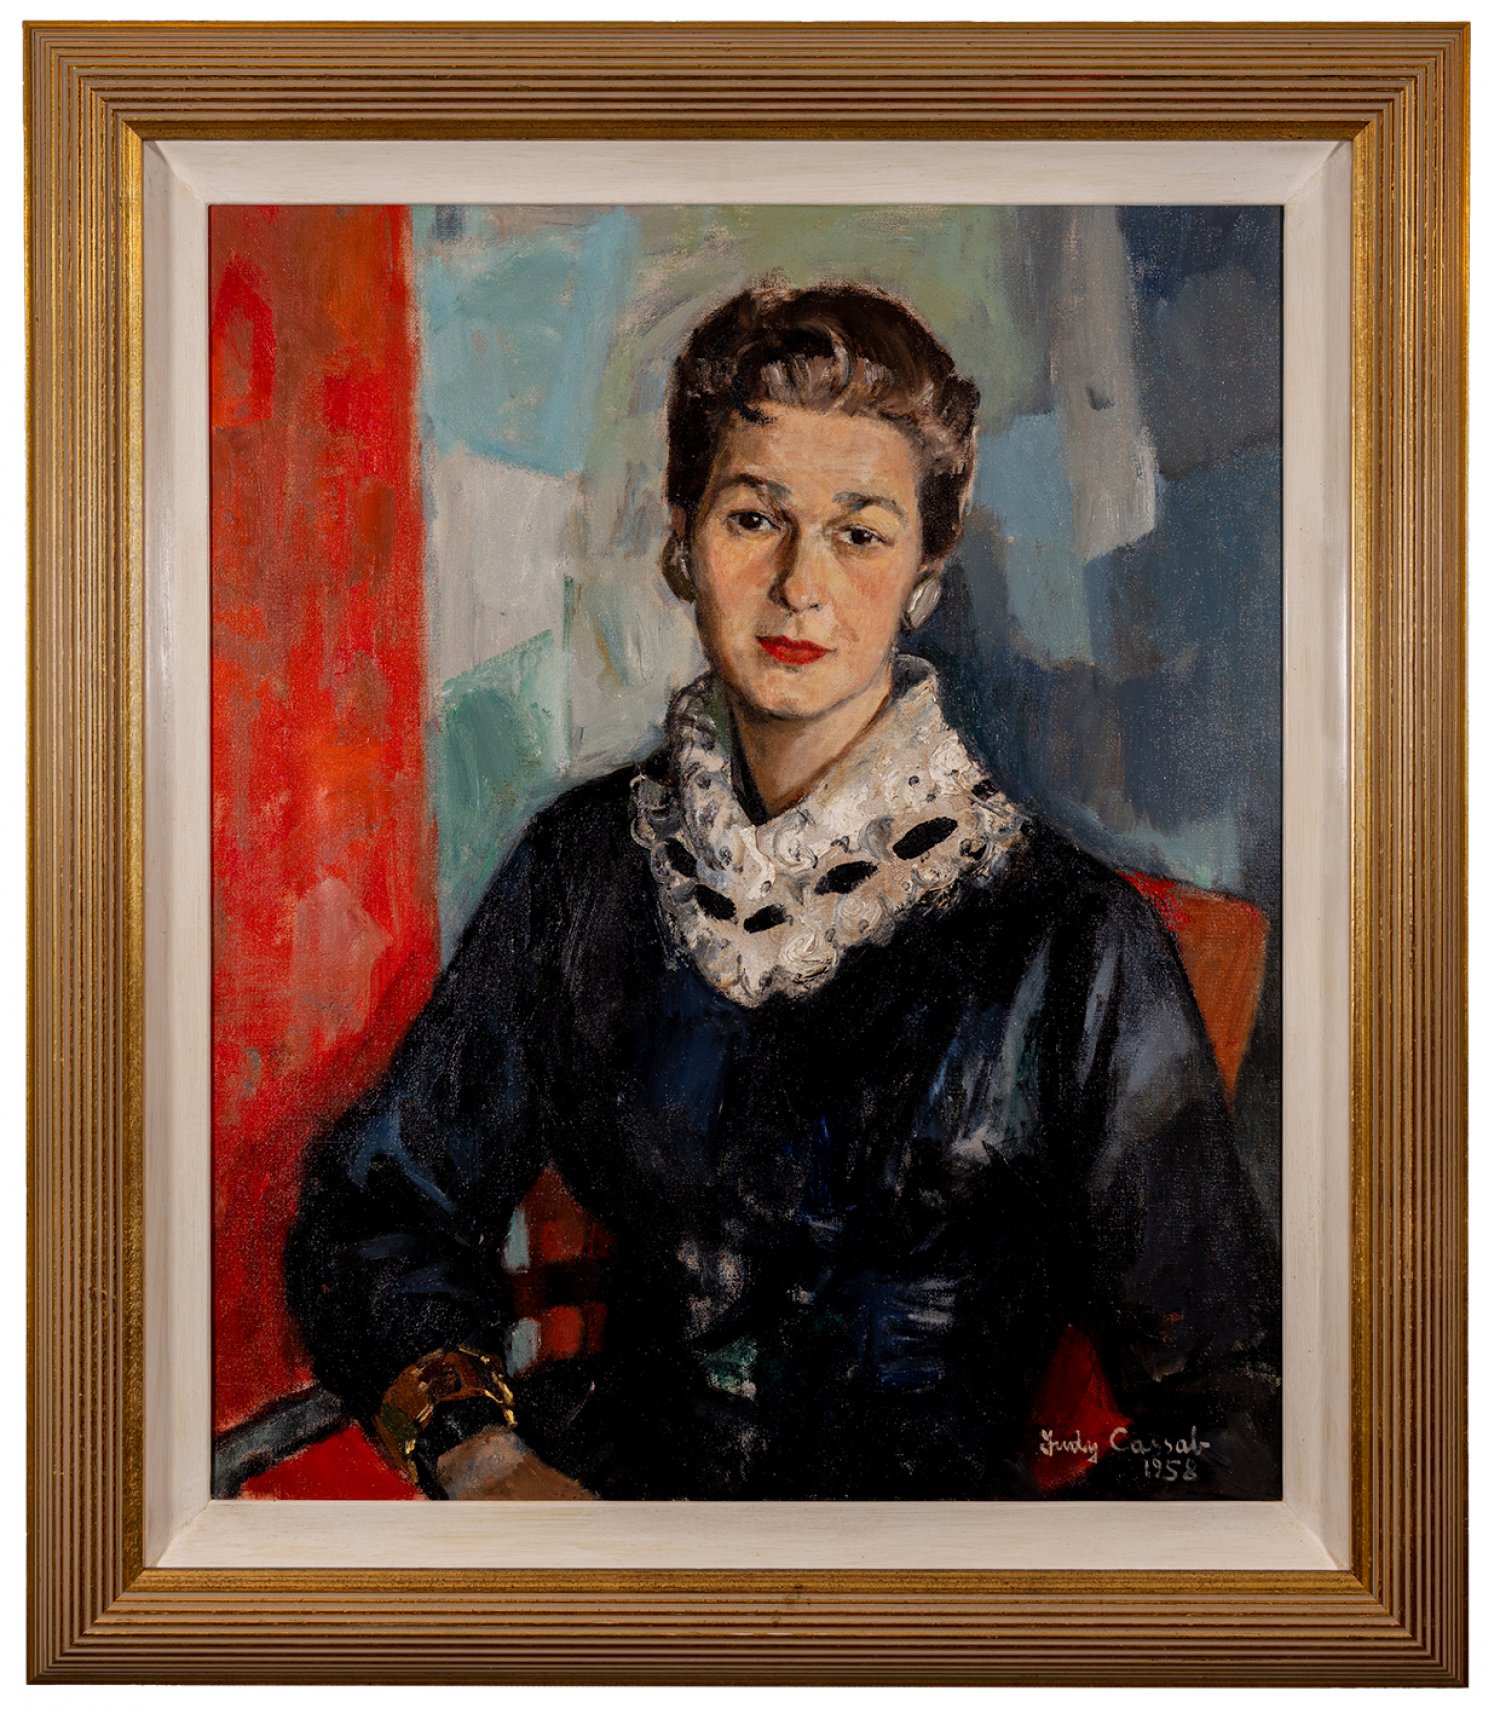 ‘Portrait of a Woman in Black’ oil on canvas dated 1958 by Judy Cassab